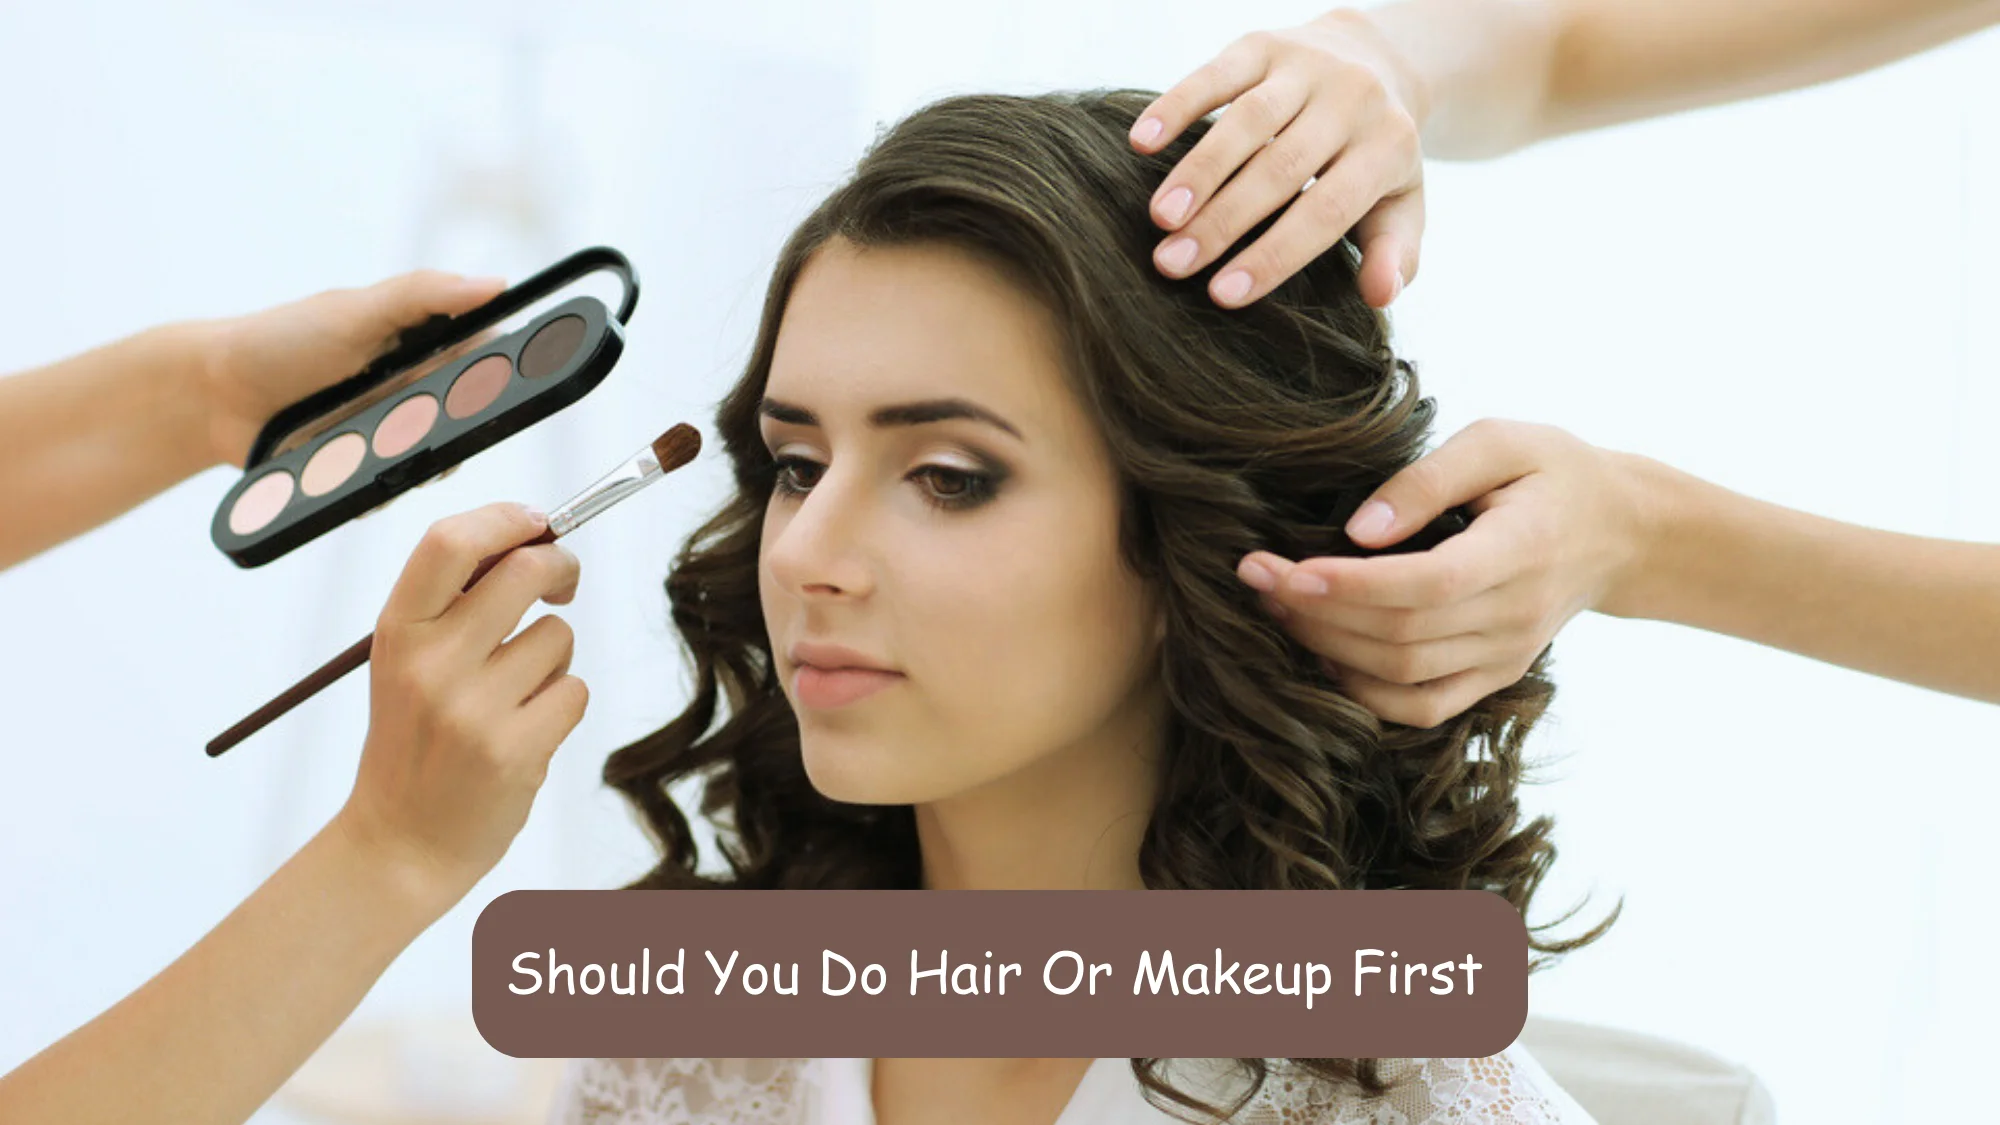 Should You Do Hair Or Makeup First